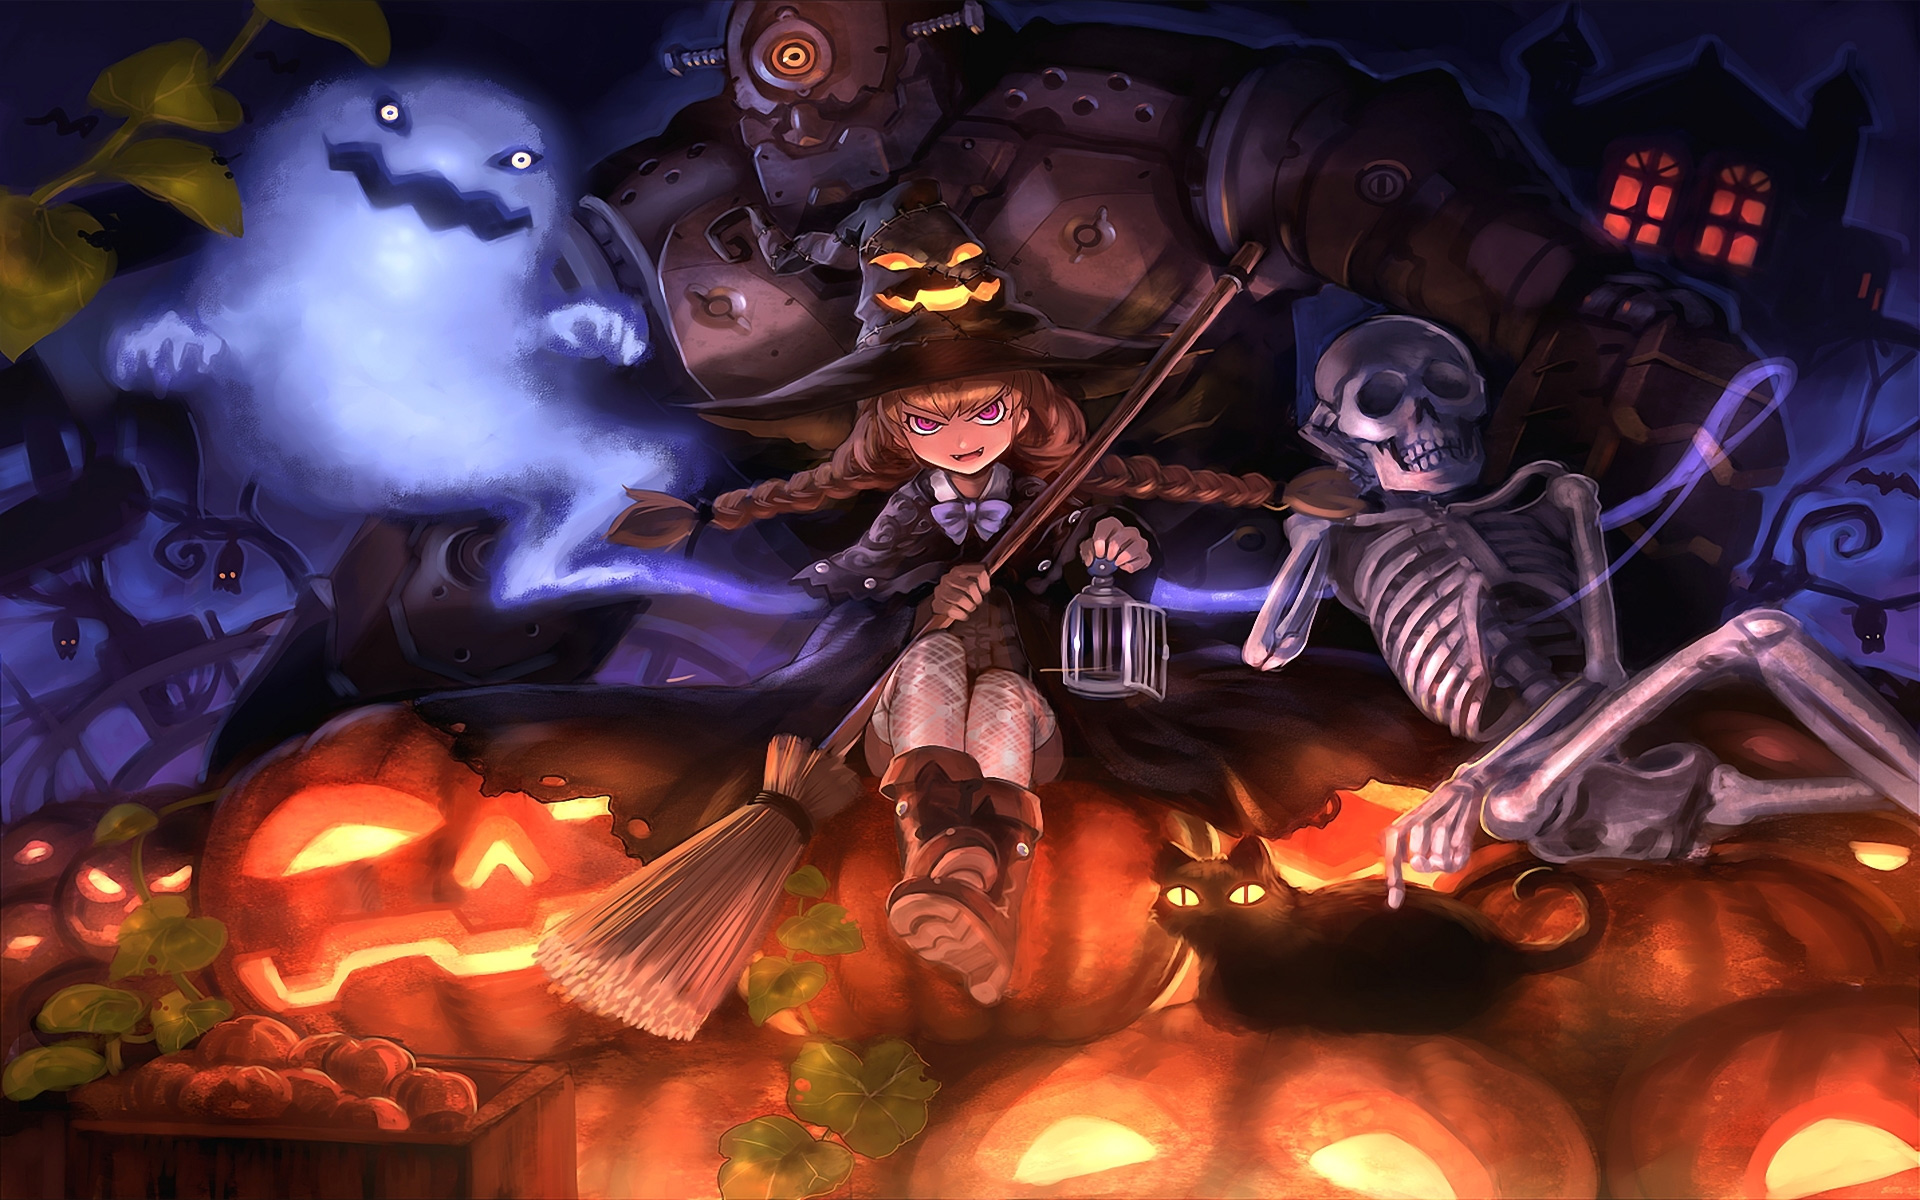  ittle Halloween Witch computer desktop wallpapers pictures images 1920x1200